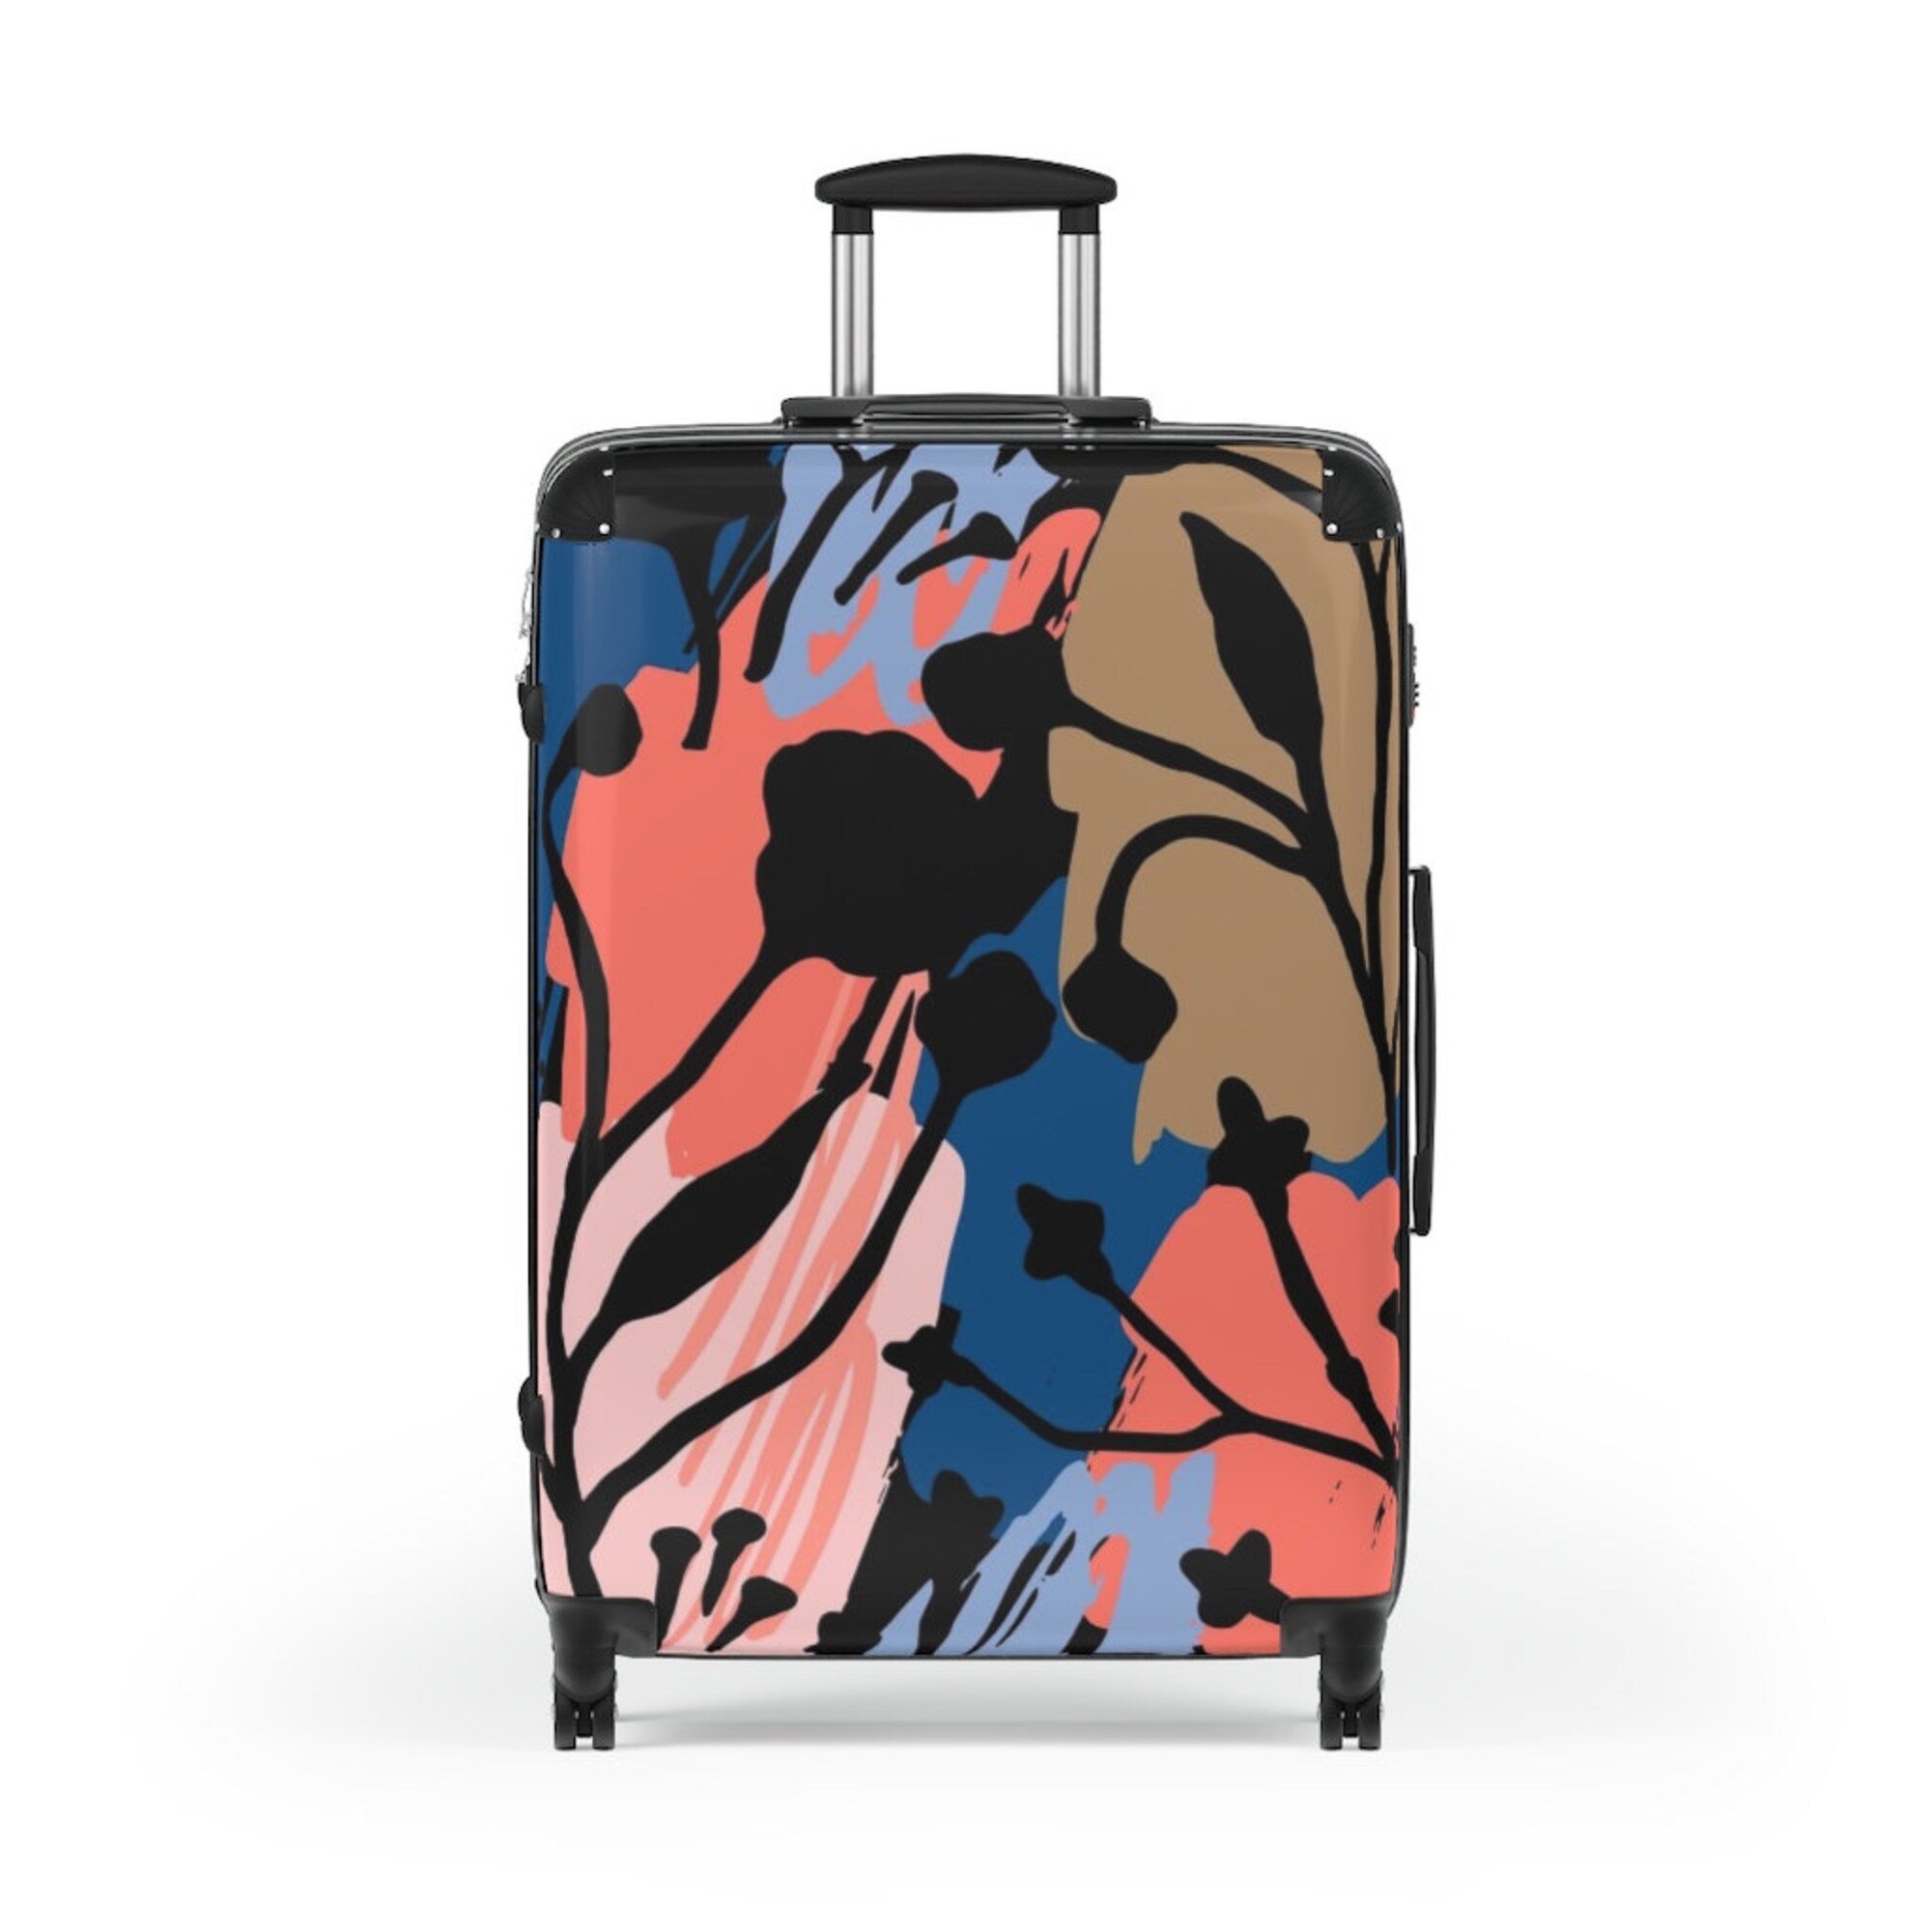 The Clementine Suitcase